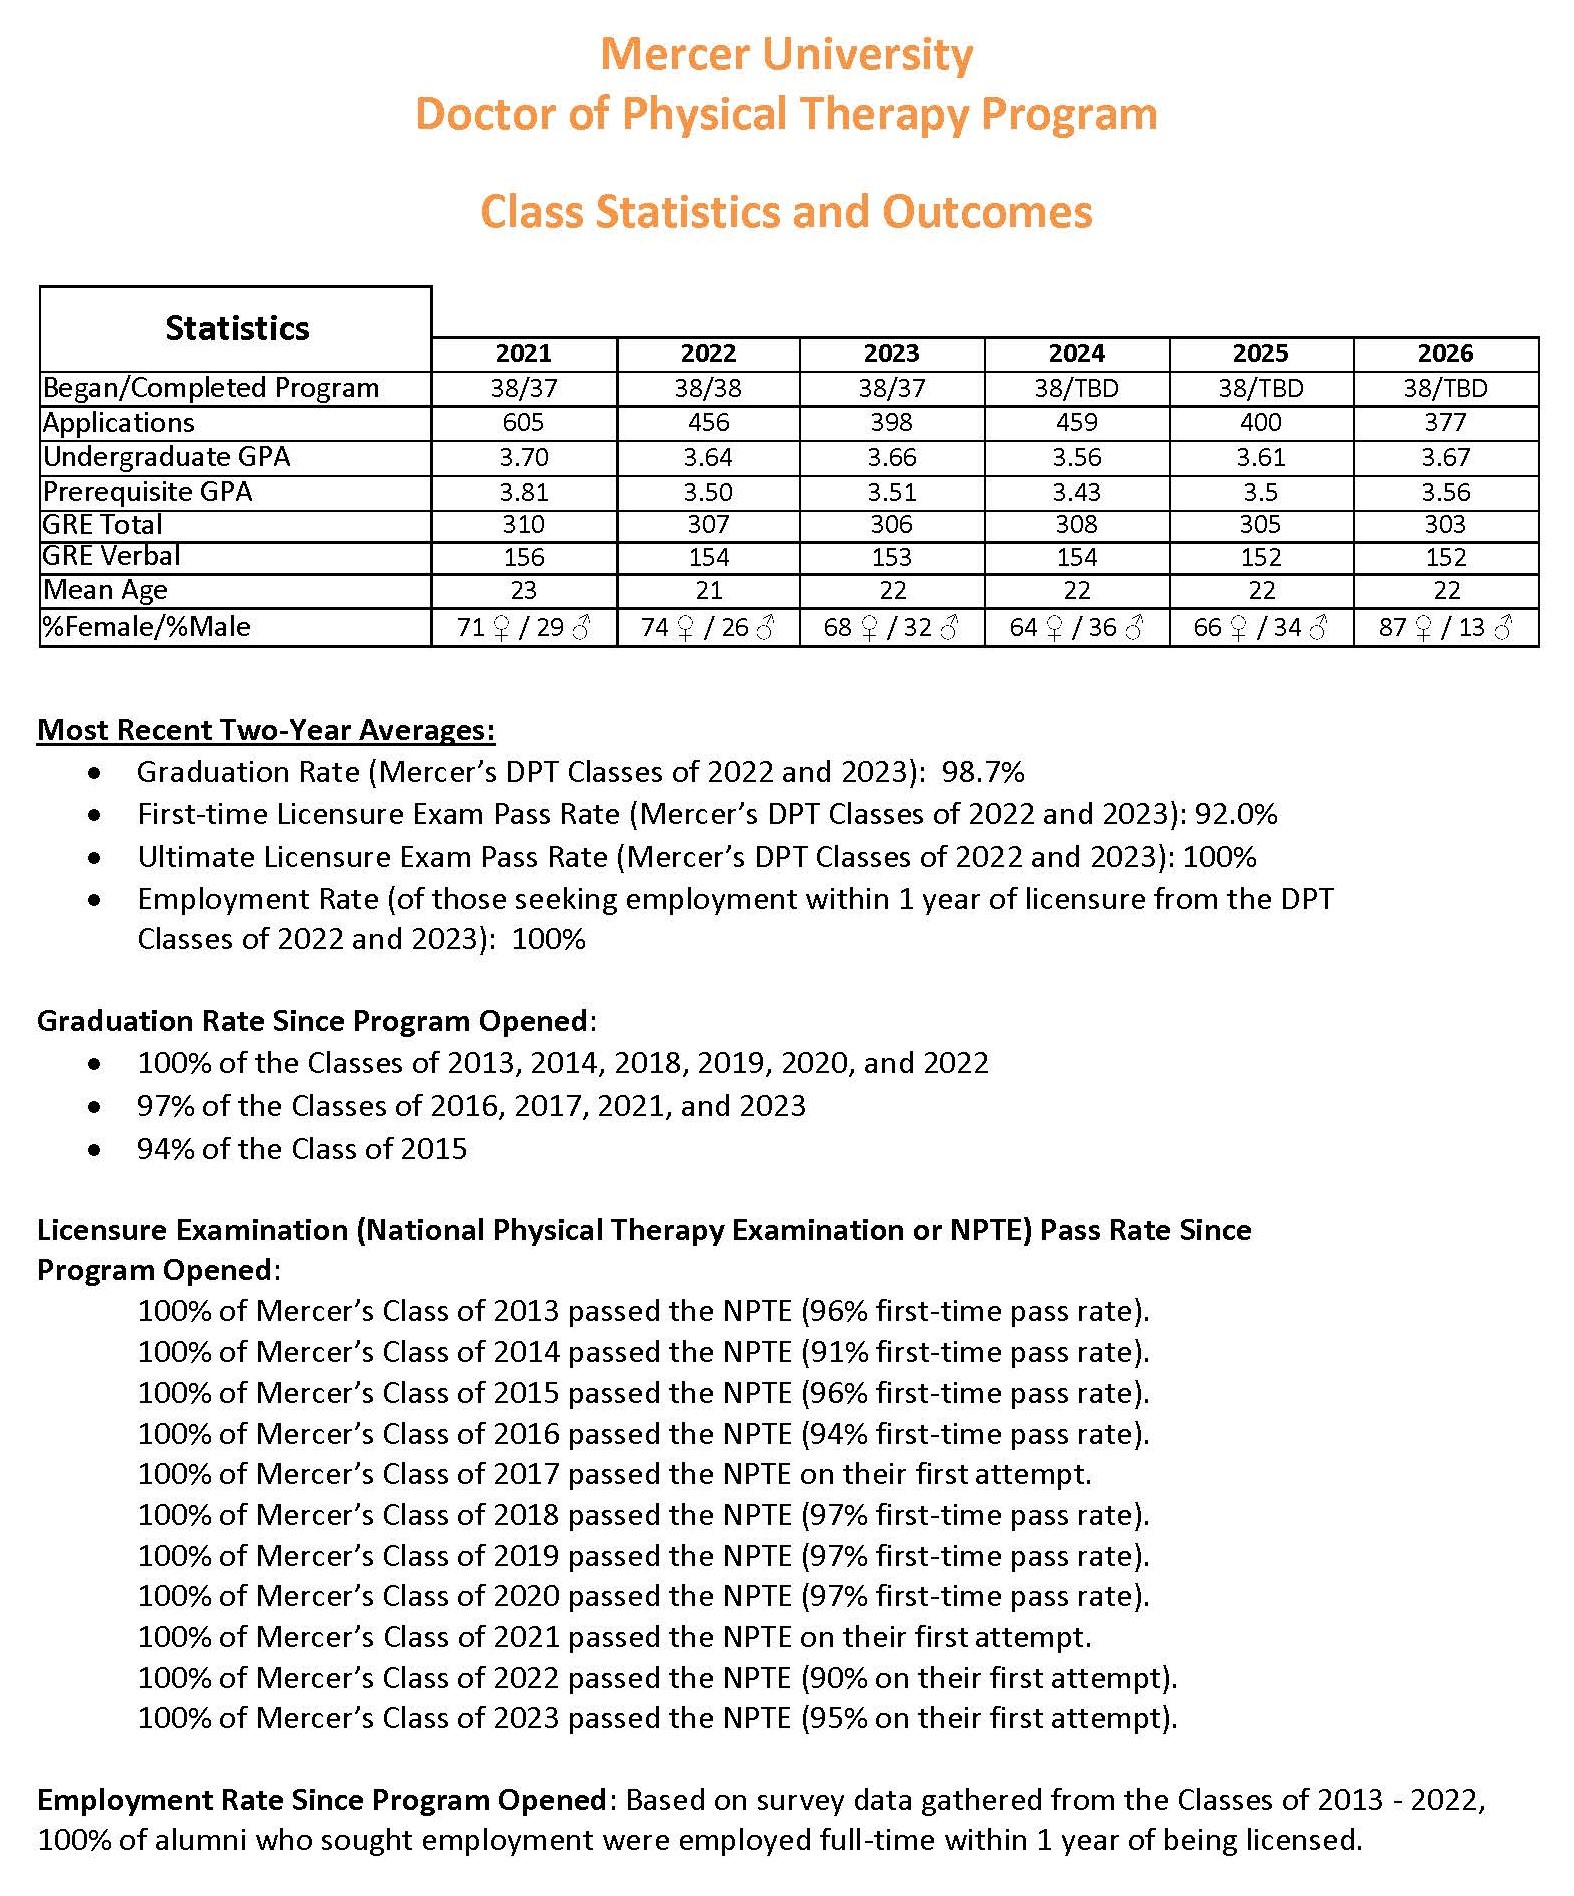 DPT Class Statistics and Outcomes 2023